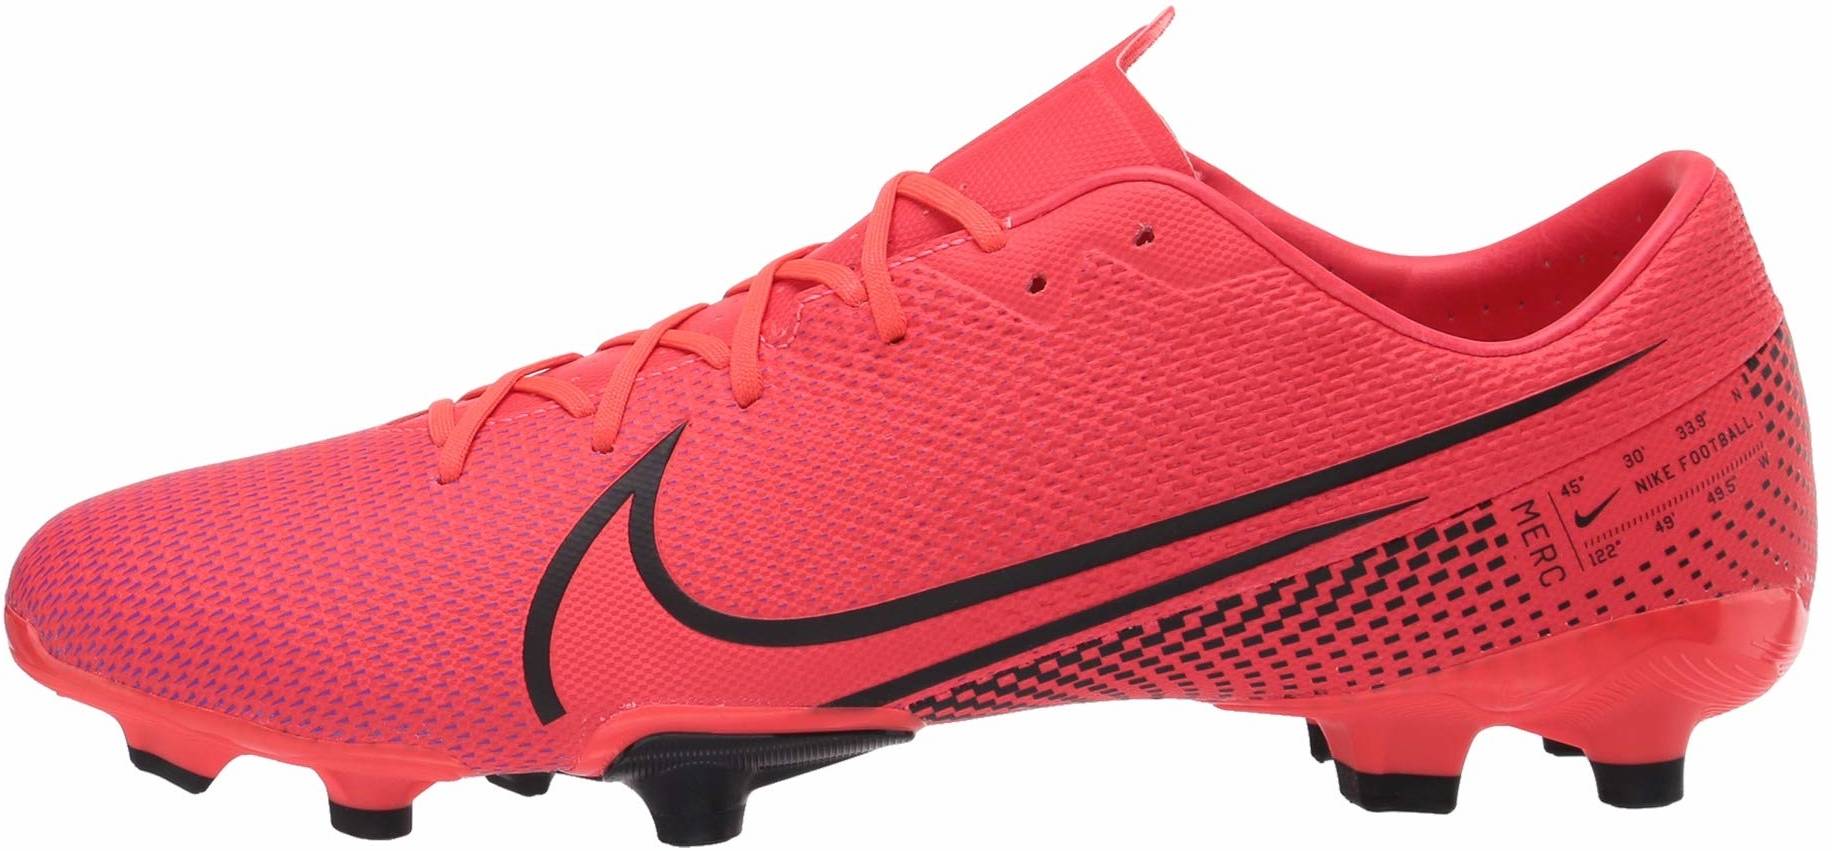 red nike soccer cleats